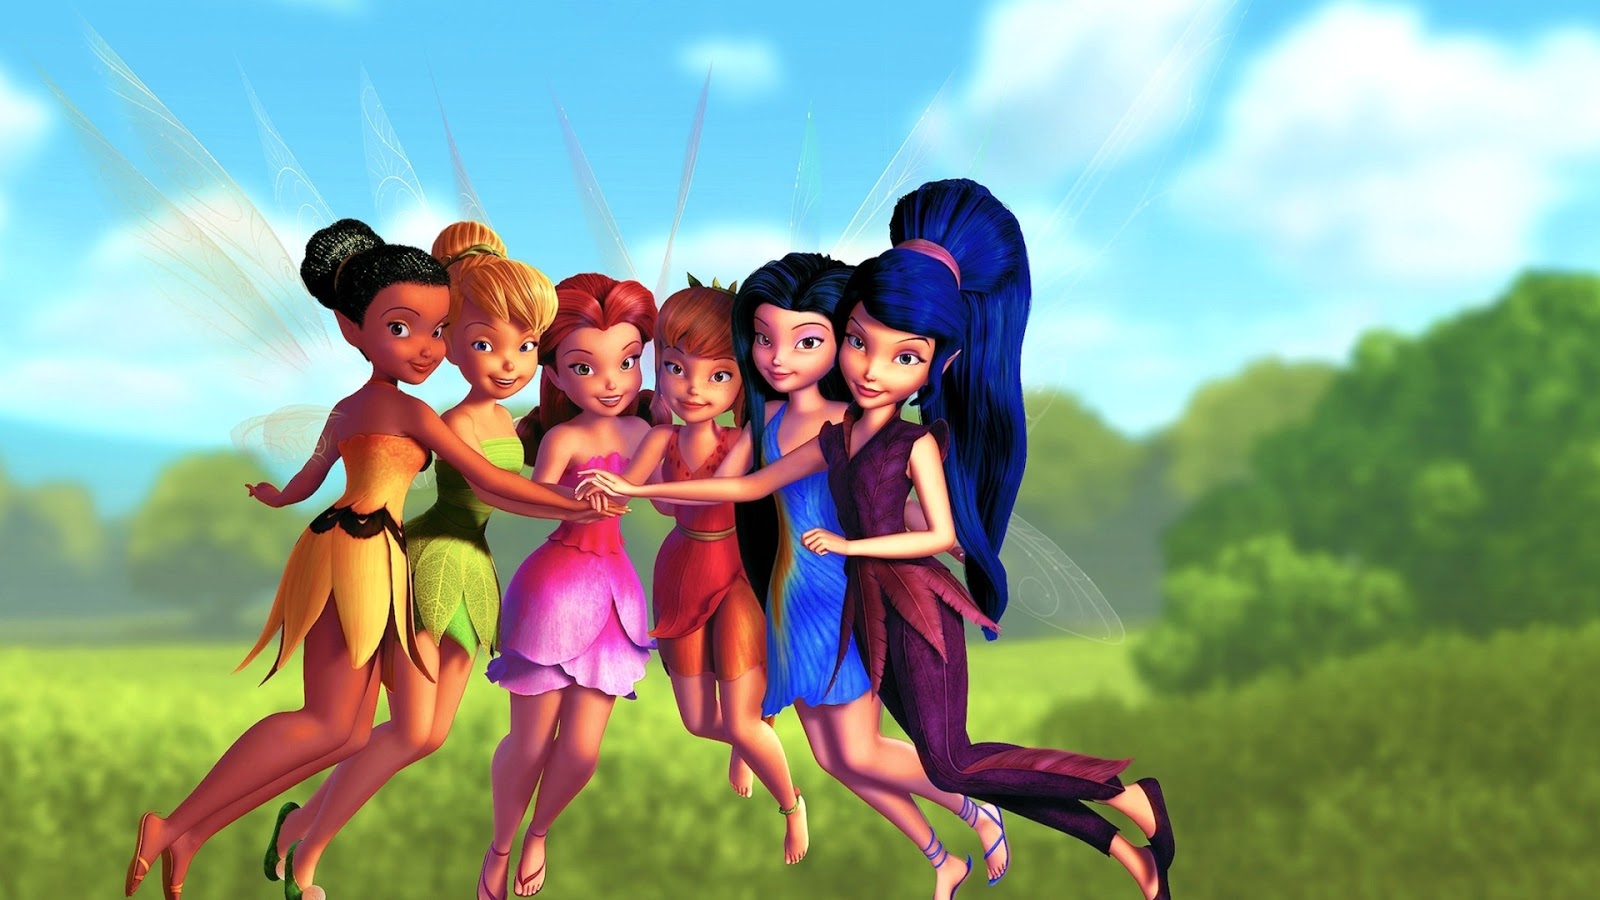 Friends From Disney Animated Fairytale Tinker Bell Series HD Wallpaper